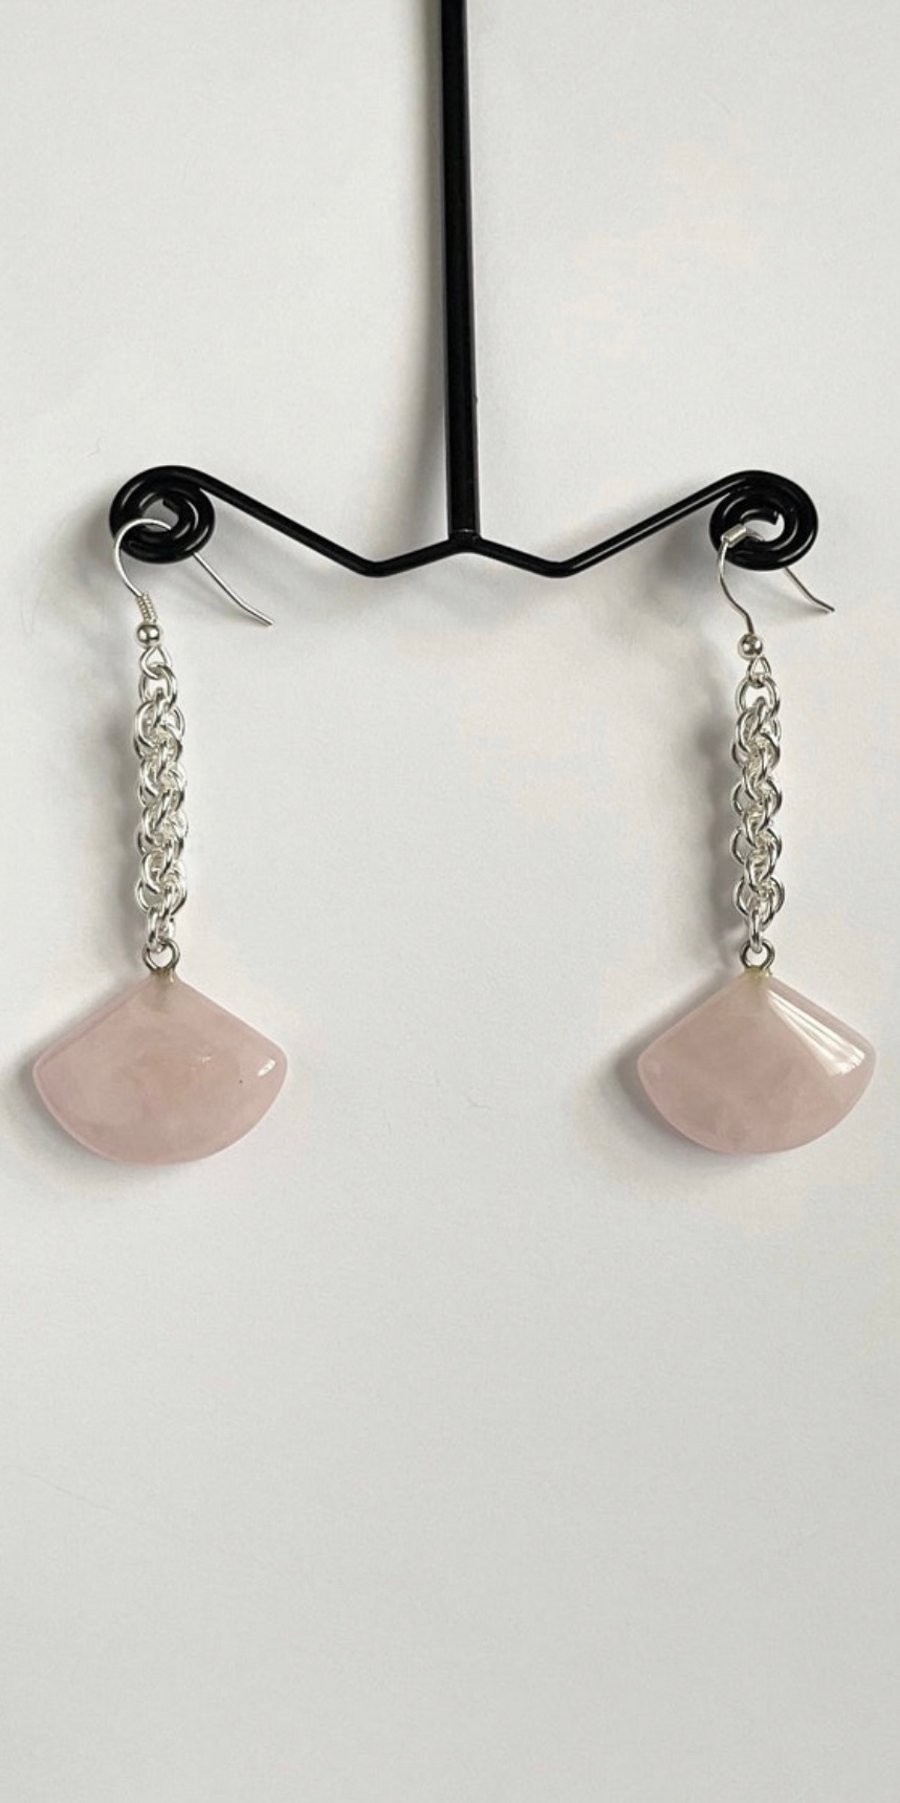 Rose Quartz Chainmaille Earrings